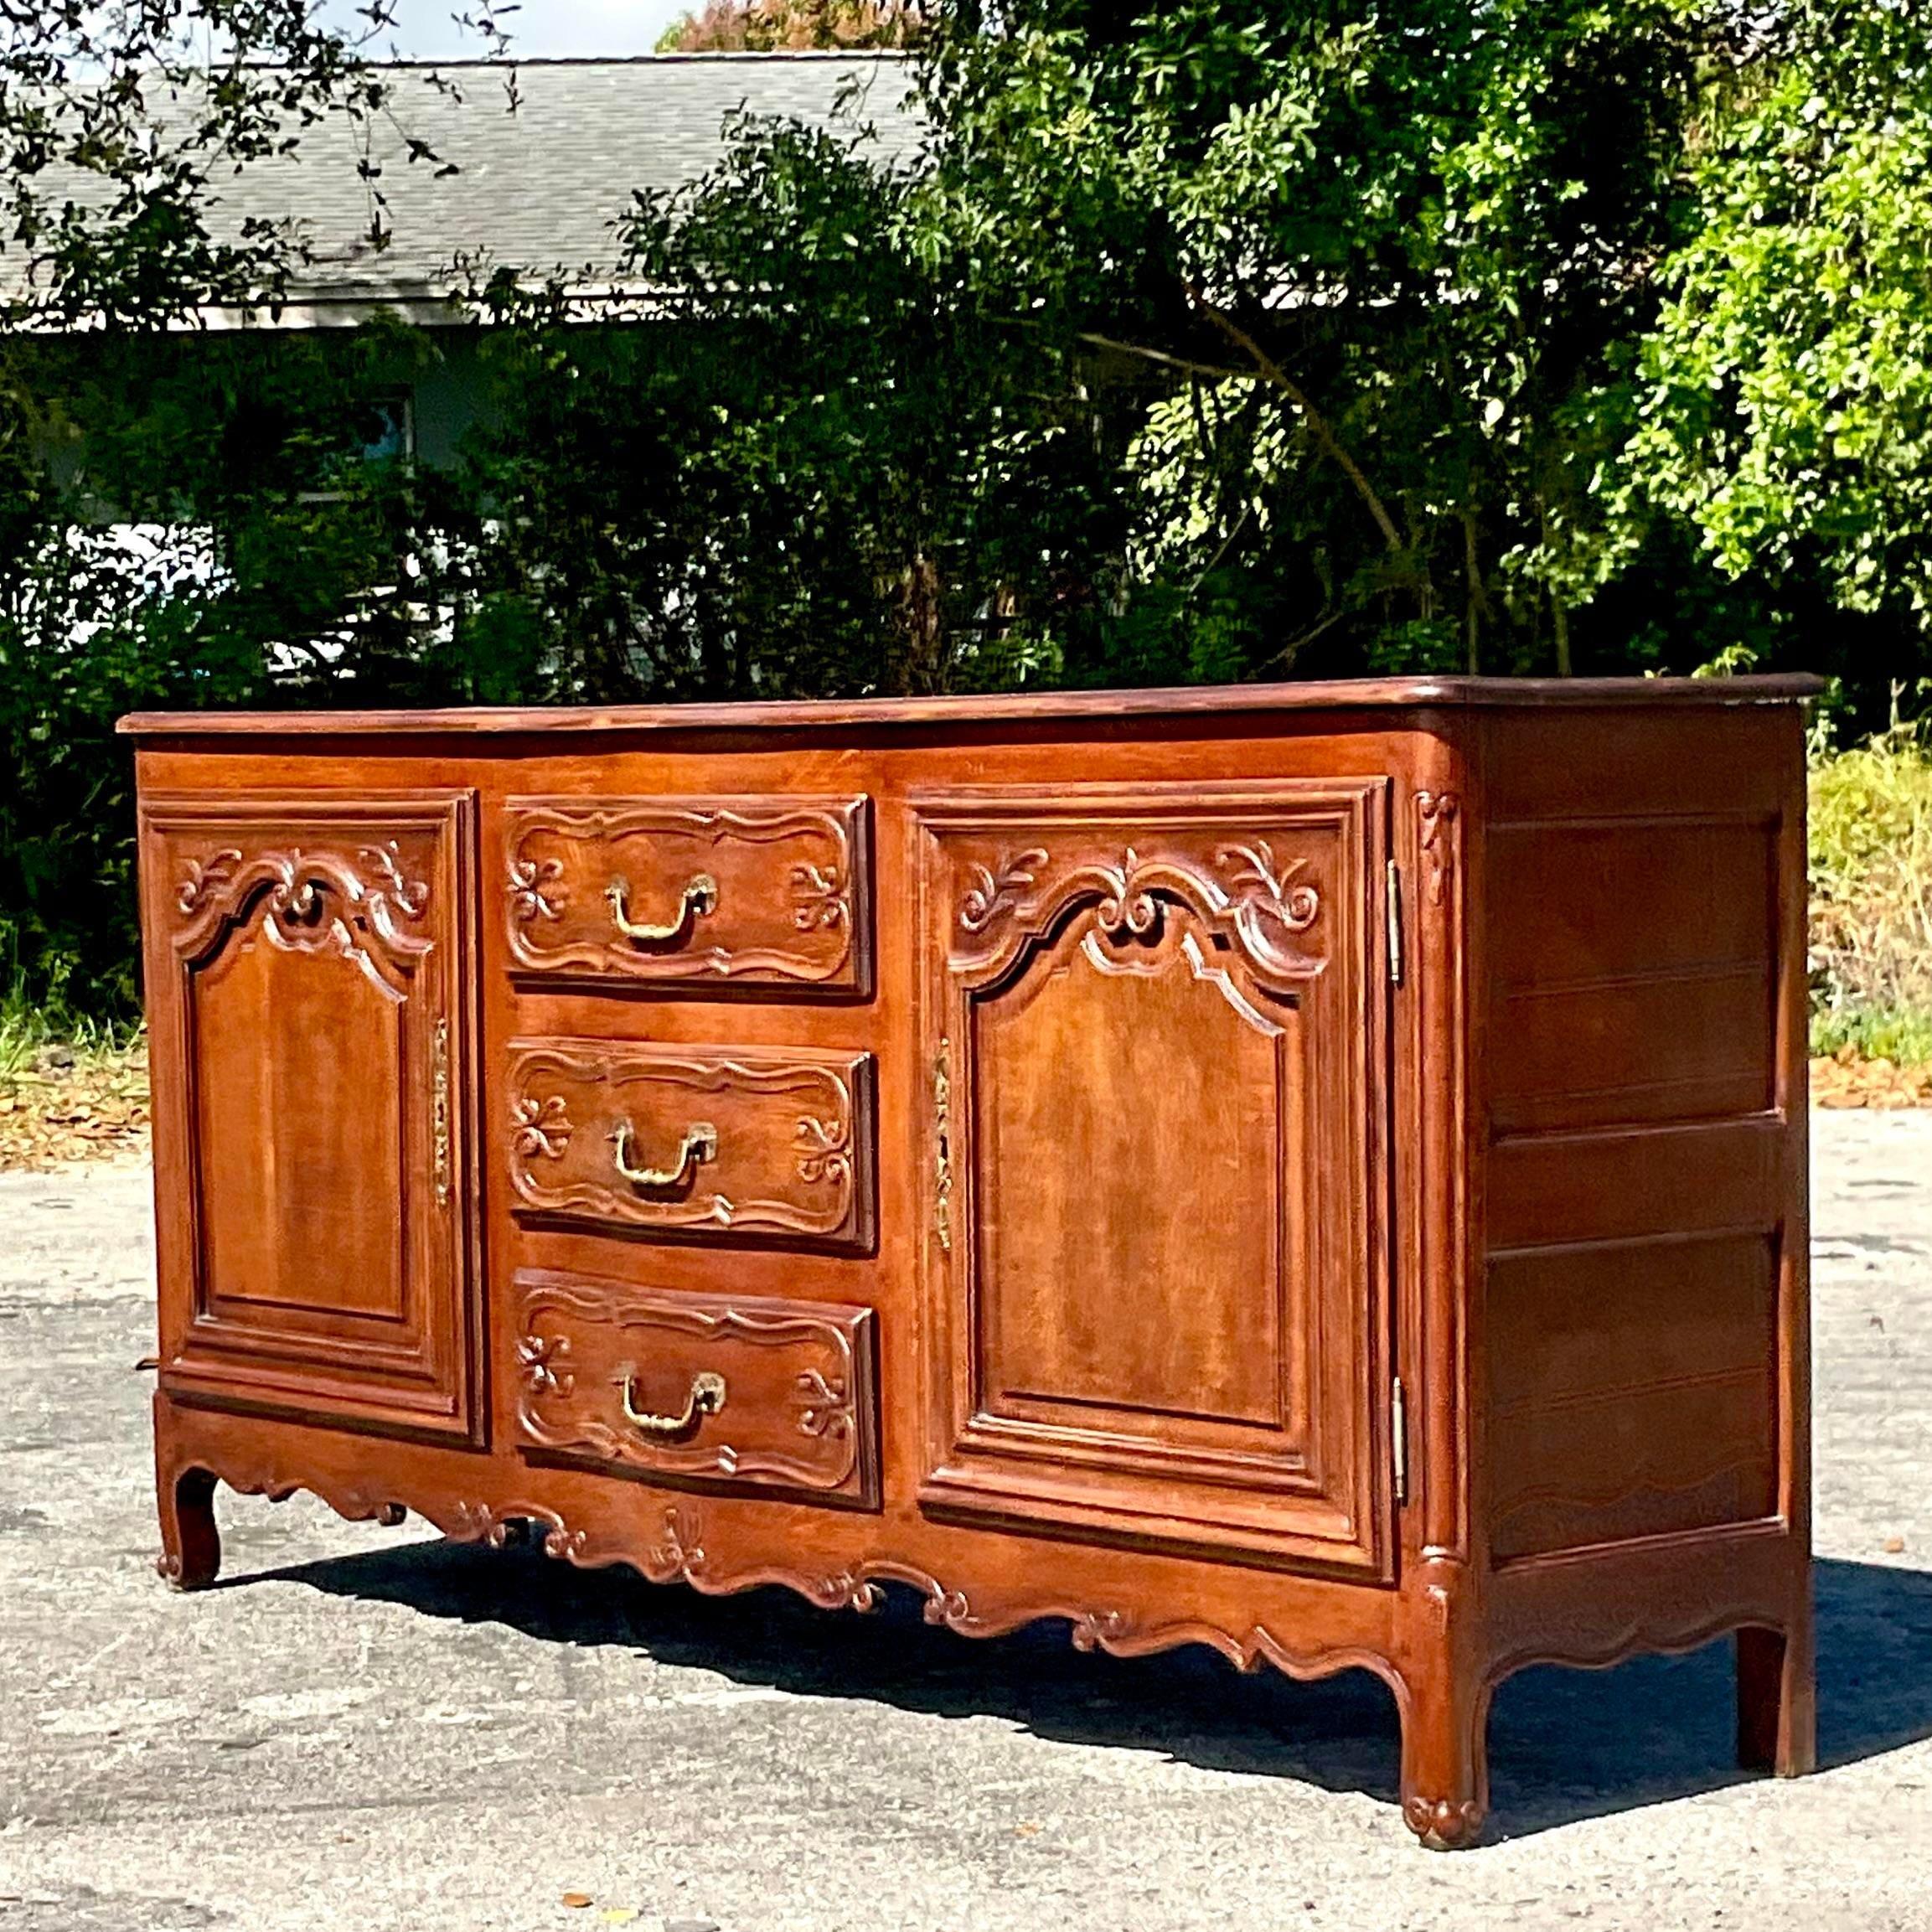 A stunning vintage 19th century Regency credenza. Beautiful hand carved detail and heavy brass hardware. Acquired from a Palm Beach estate.